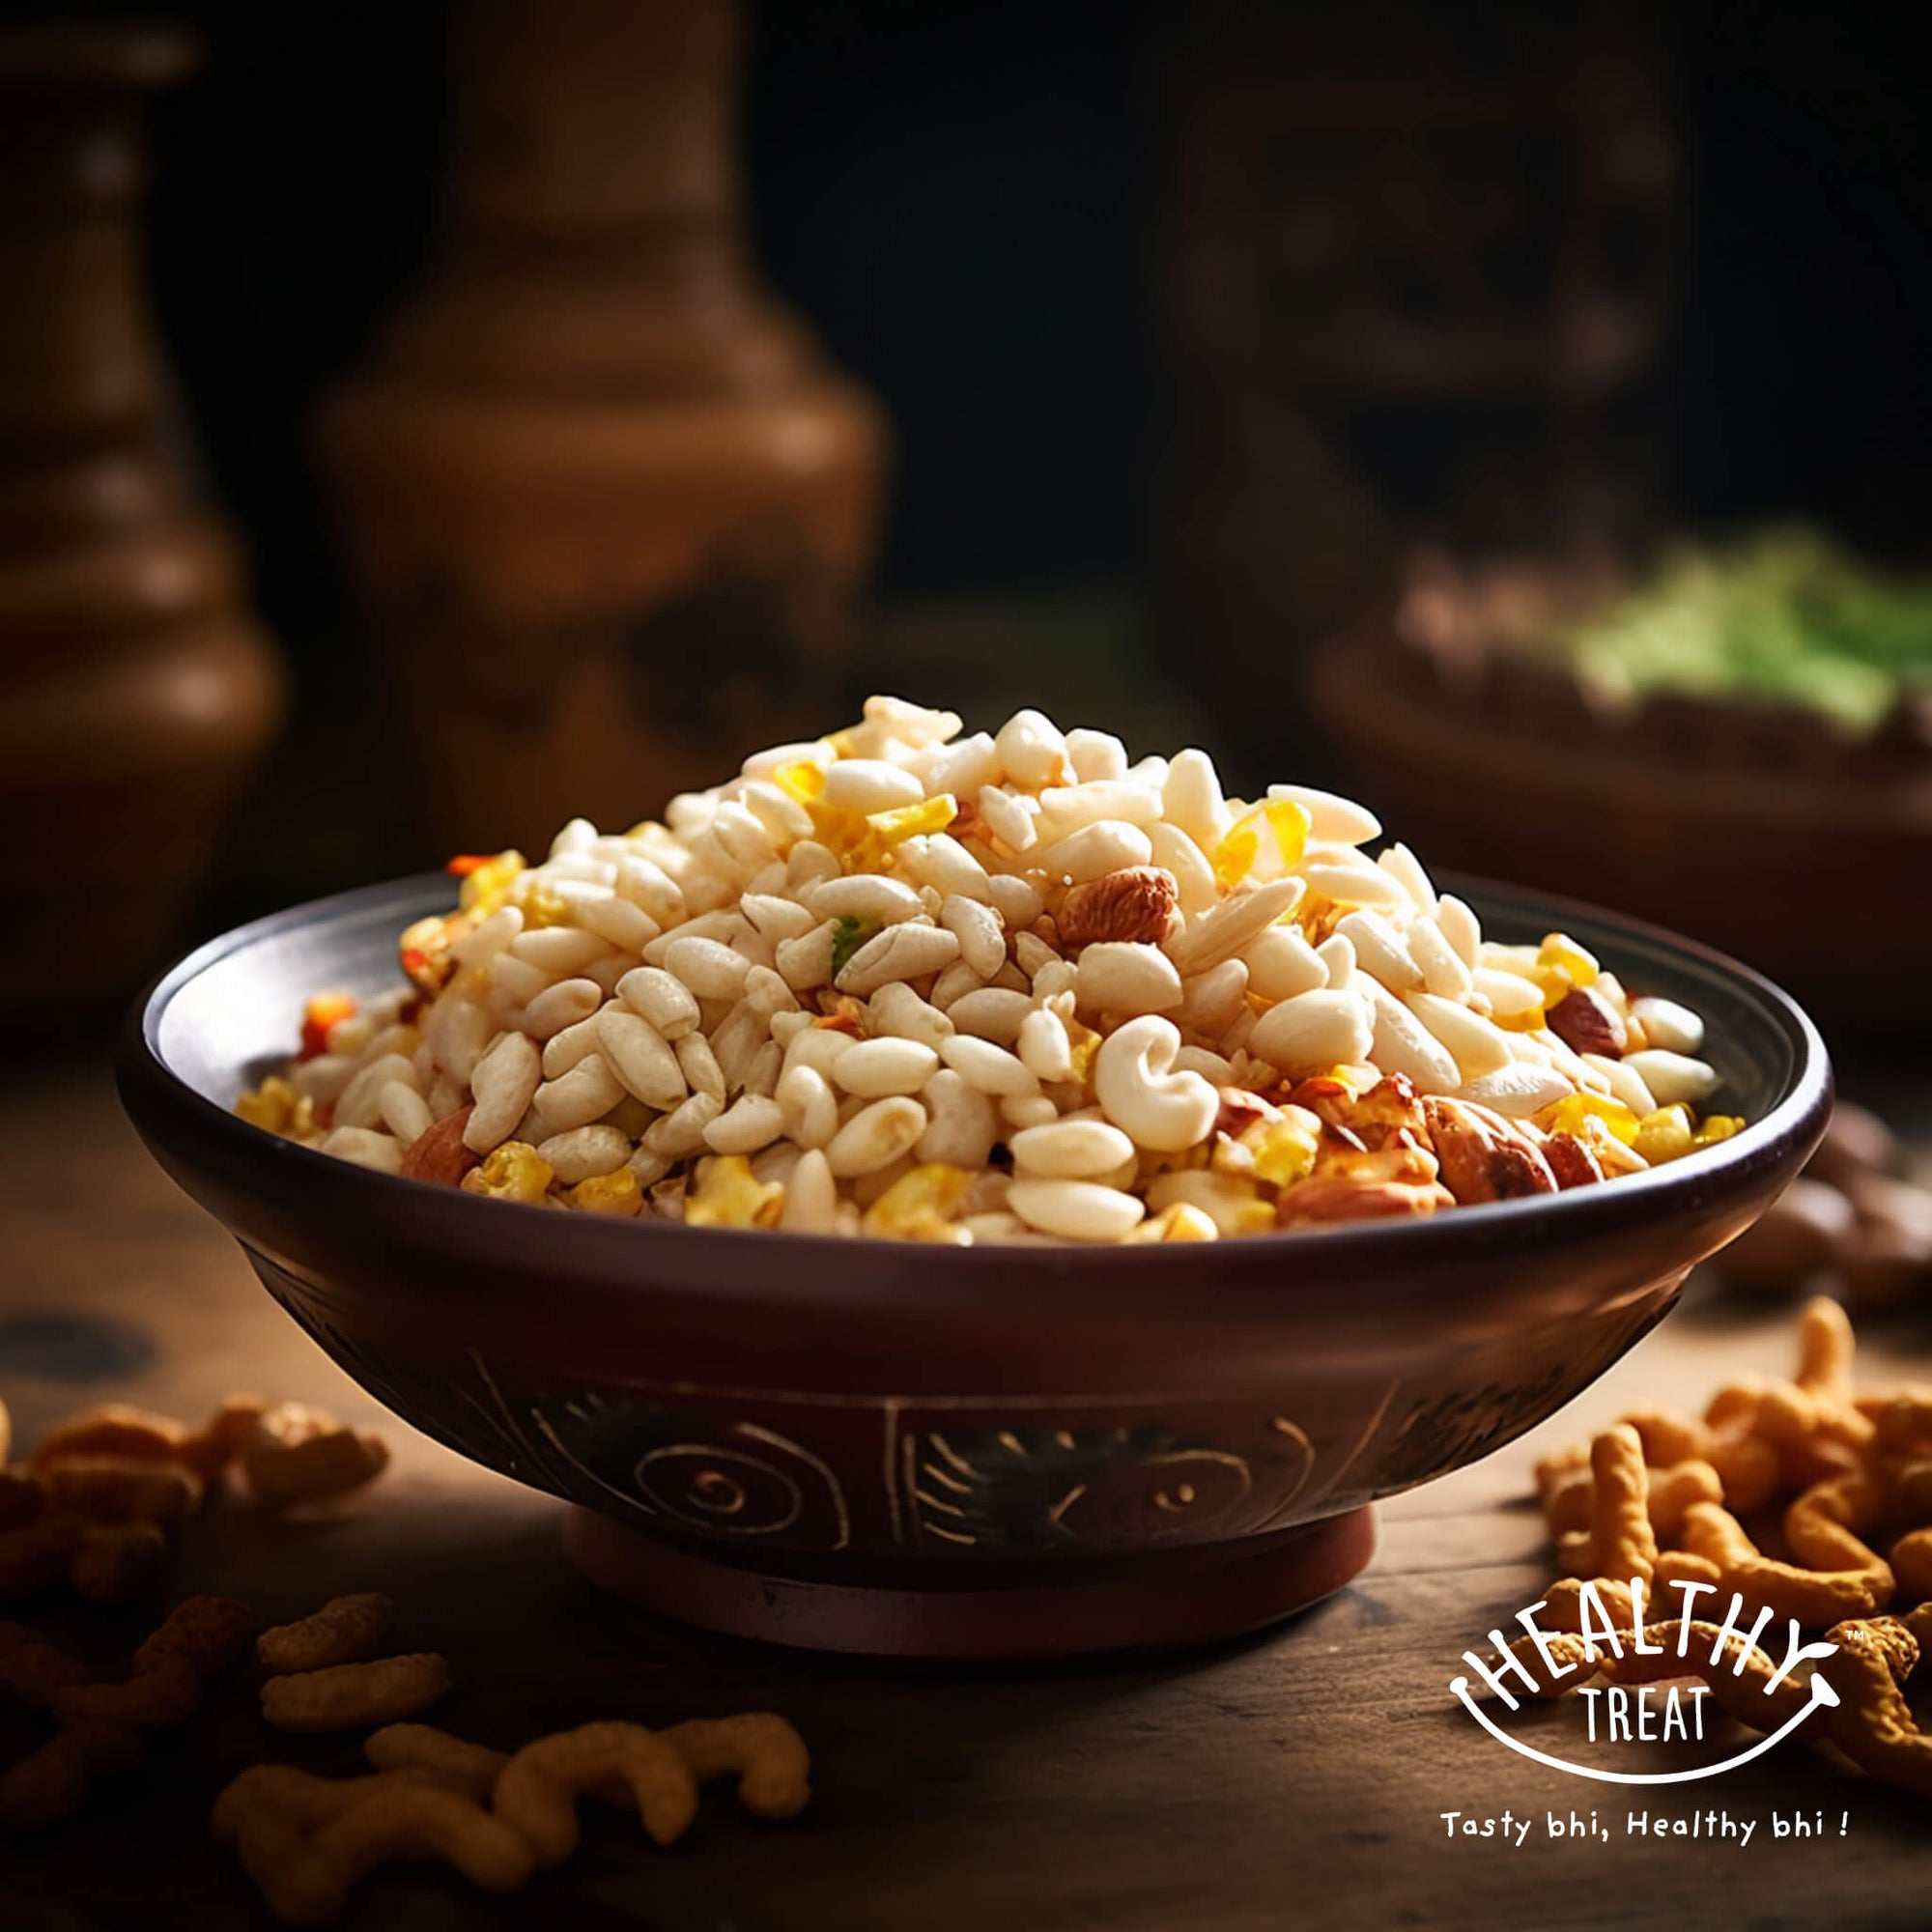 Roasted Bhel mix or puffed rice by Healthy Treat, mixed with roasted bengal gram, roasted peanuts, roasted sorghum and curry leaves. Delightful taste and healthy crunch, its a great diet snack.